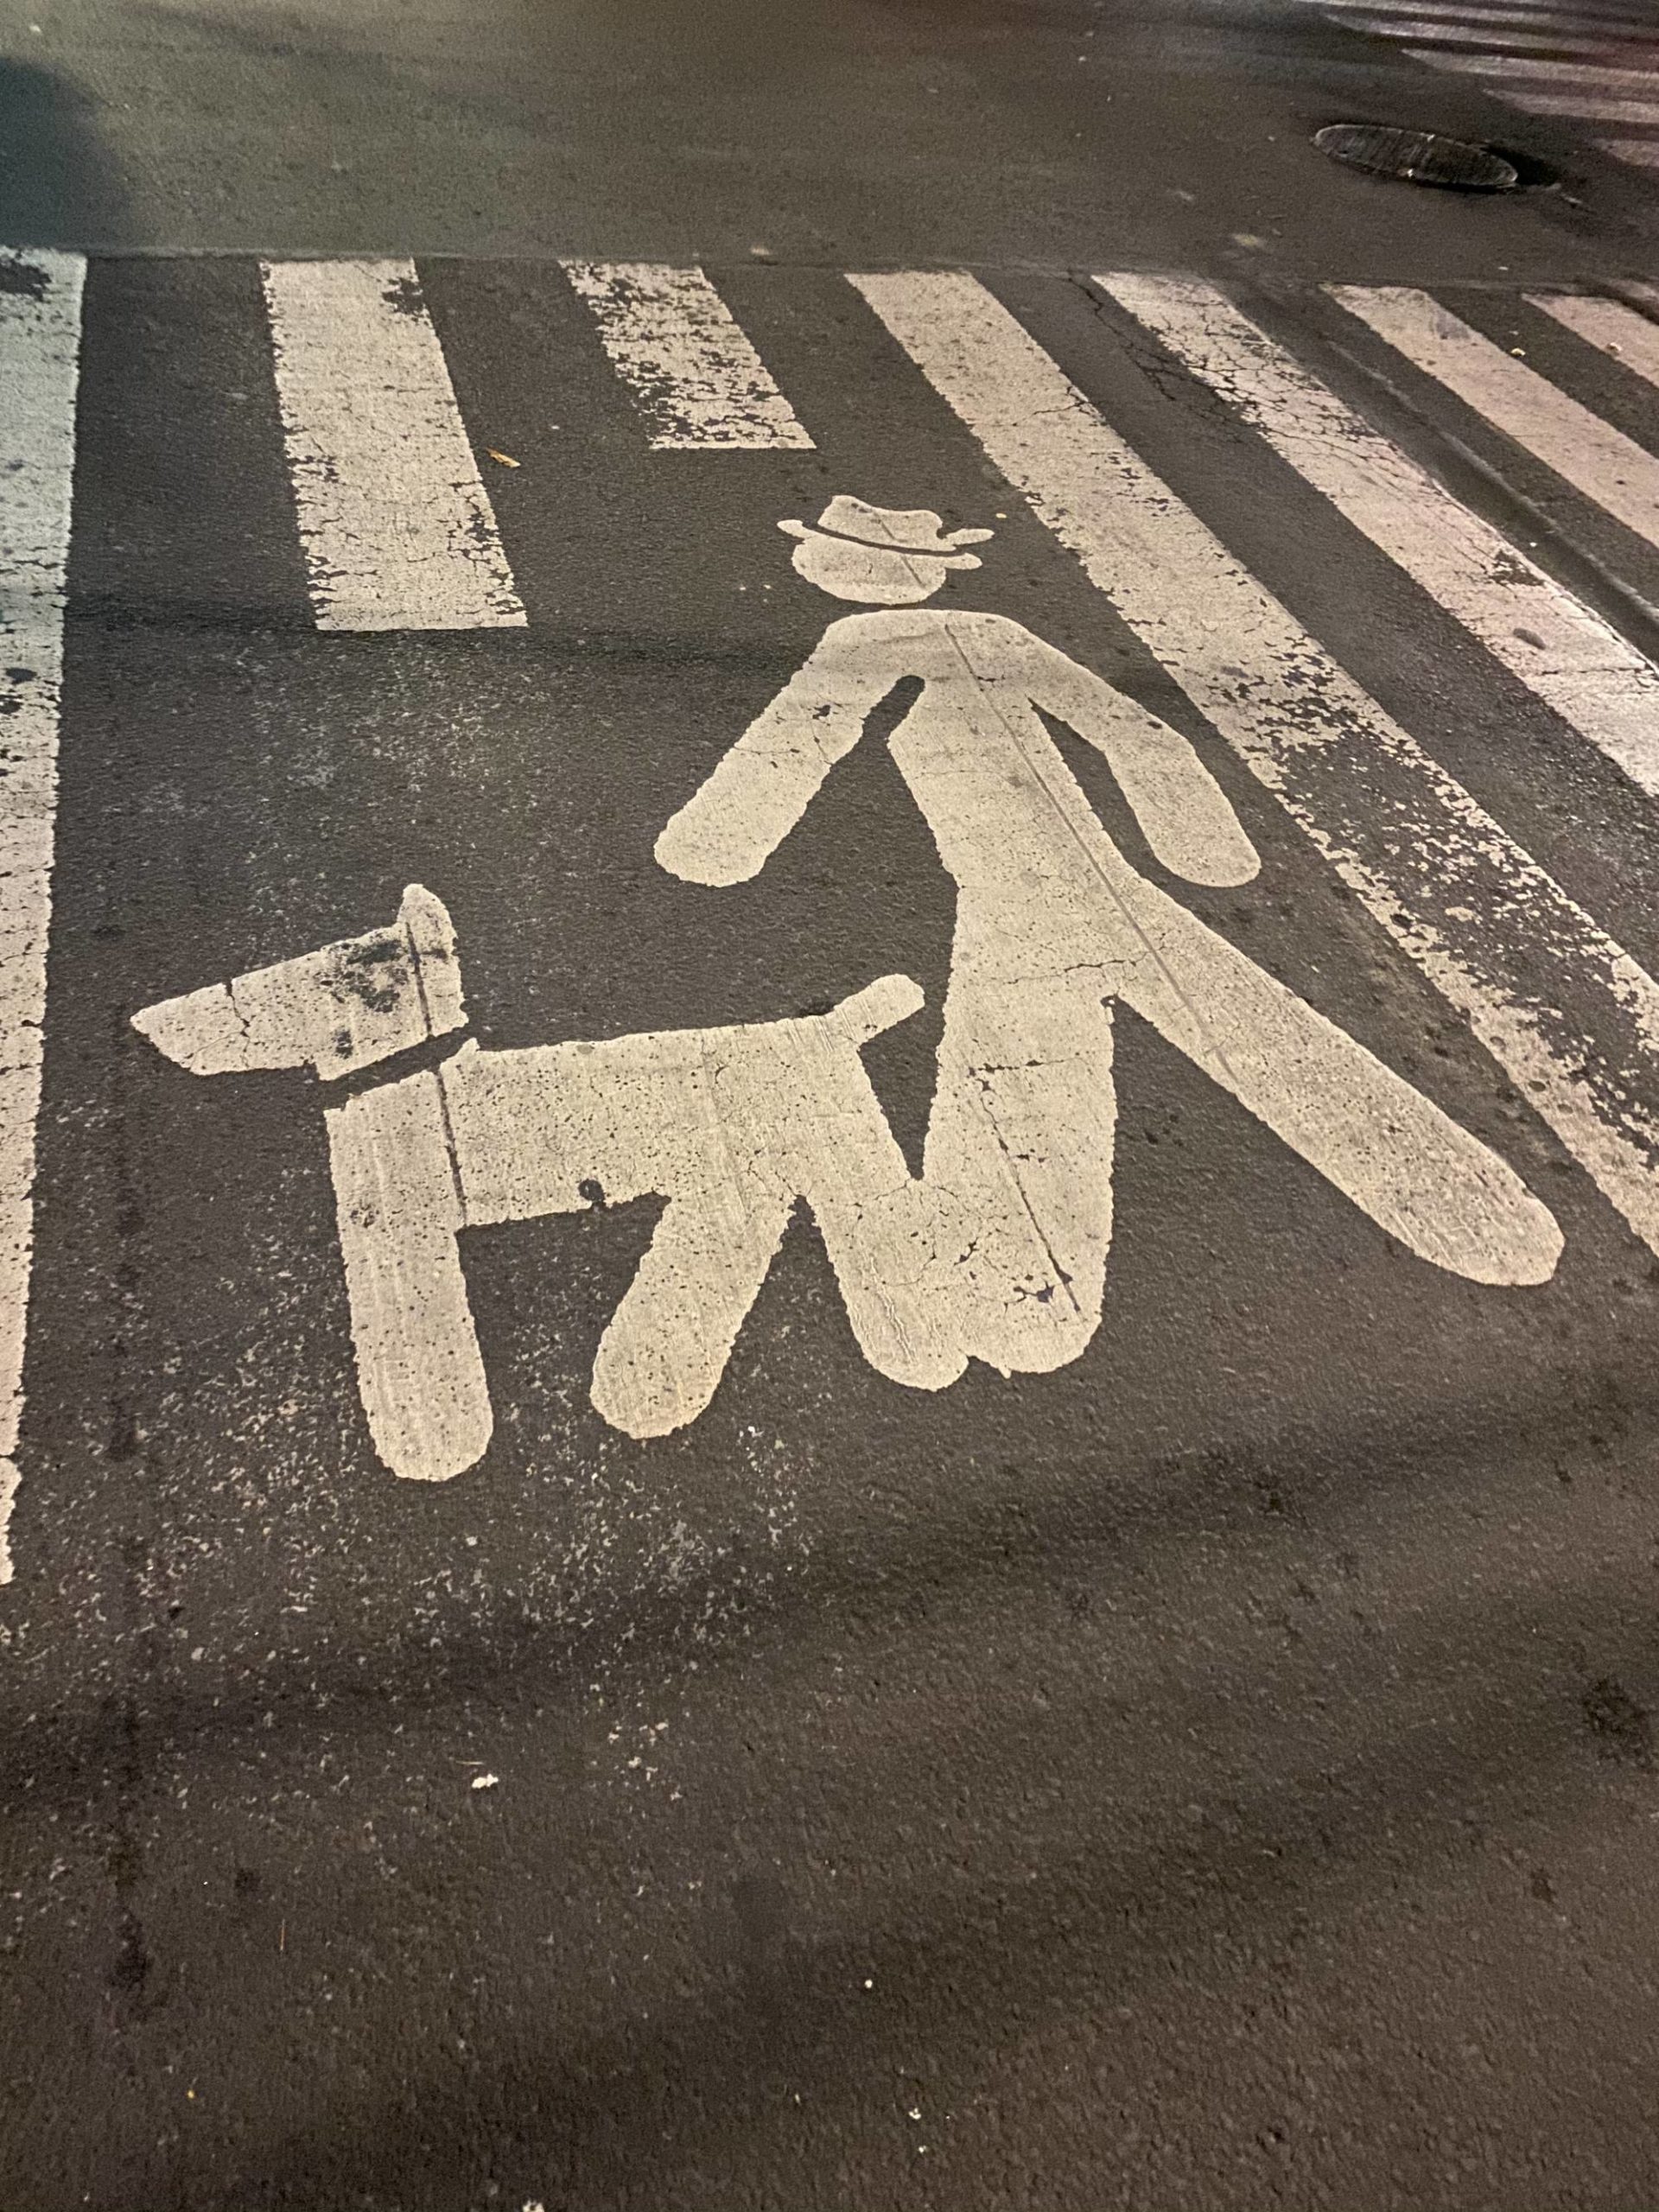 In+Mexico%2C+crosswalk+man+has+a+hat+and+a+dog